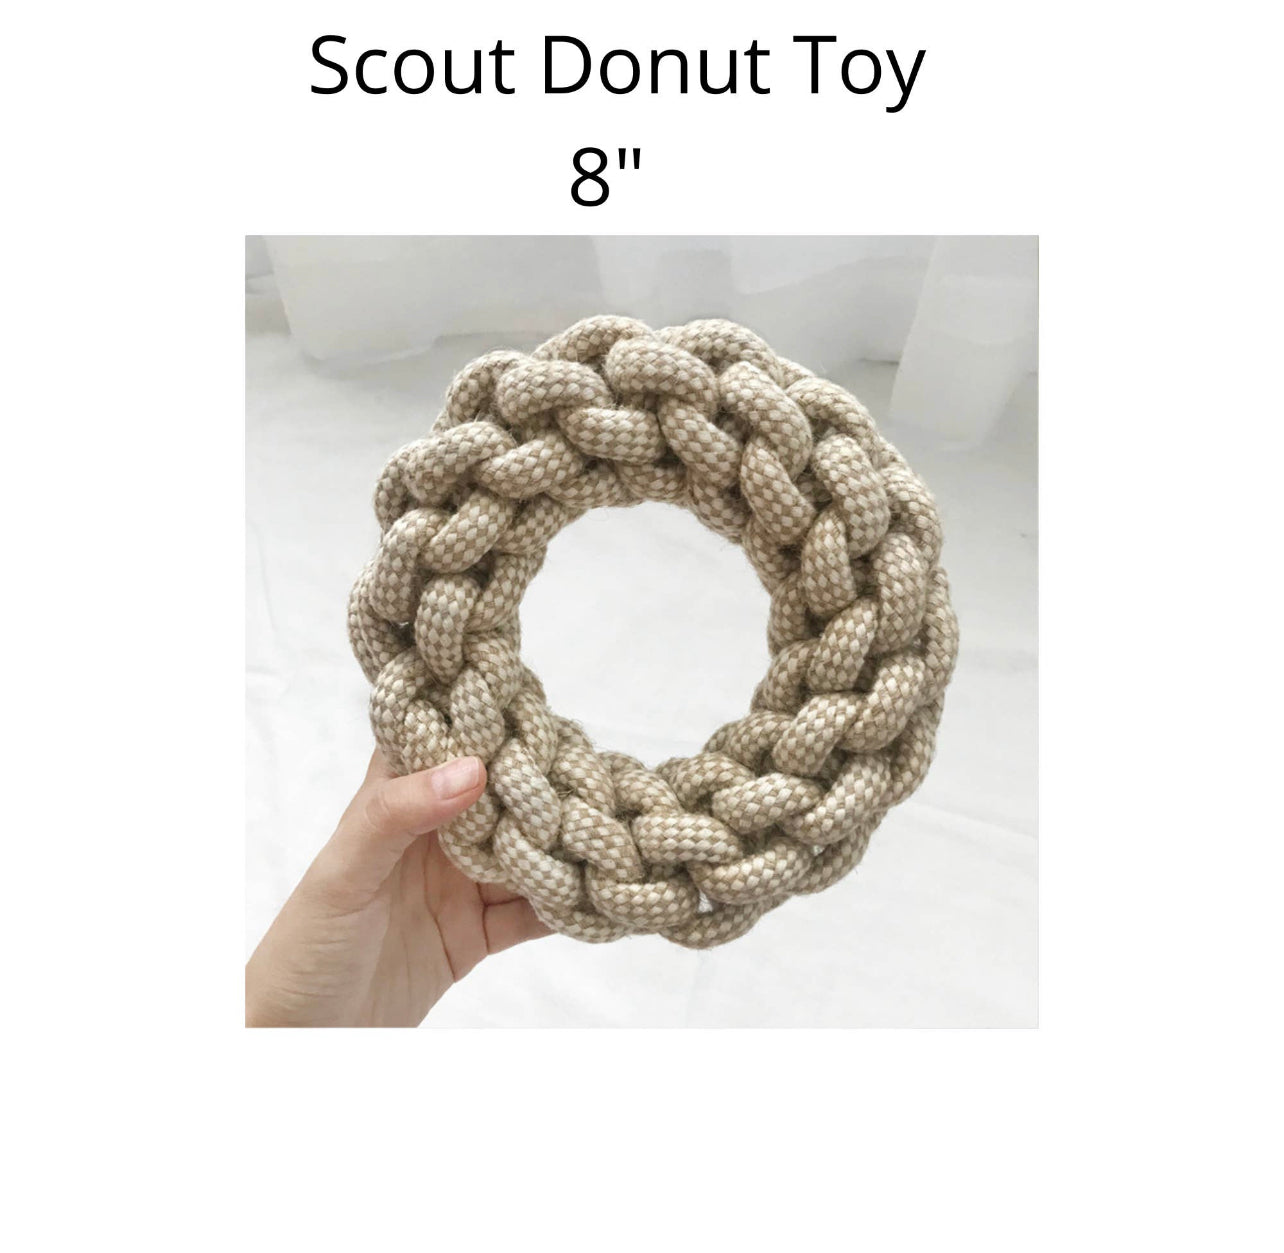 Scout donut